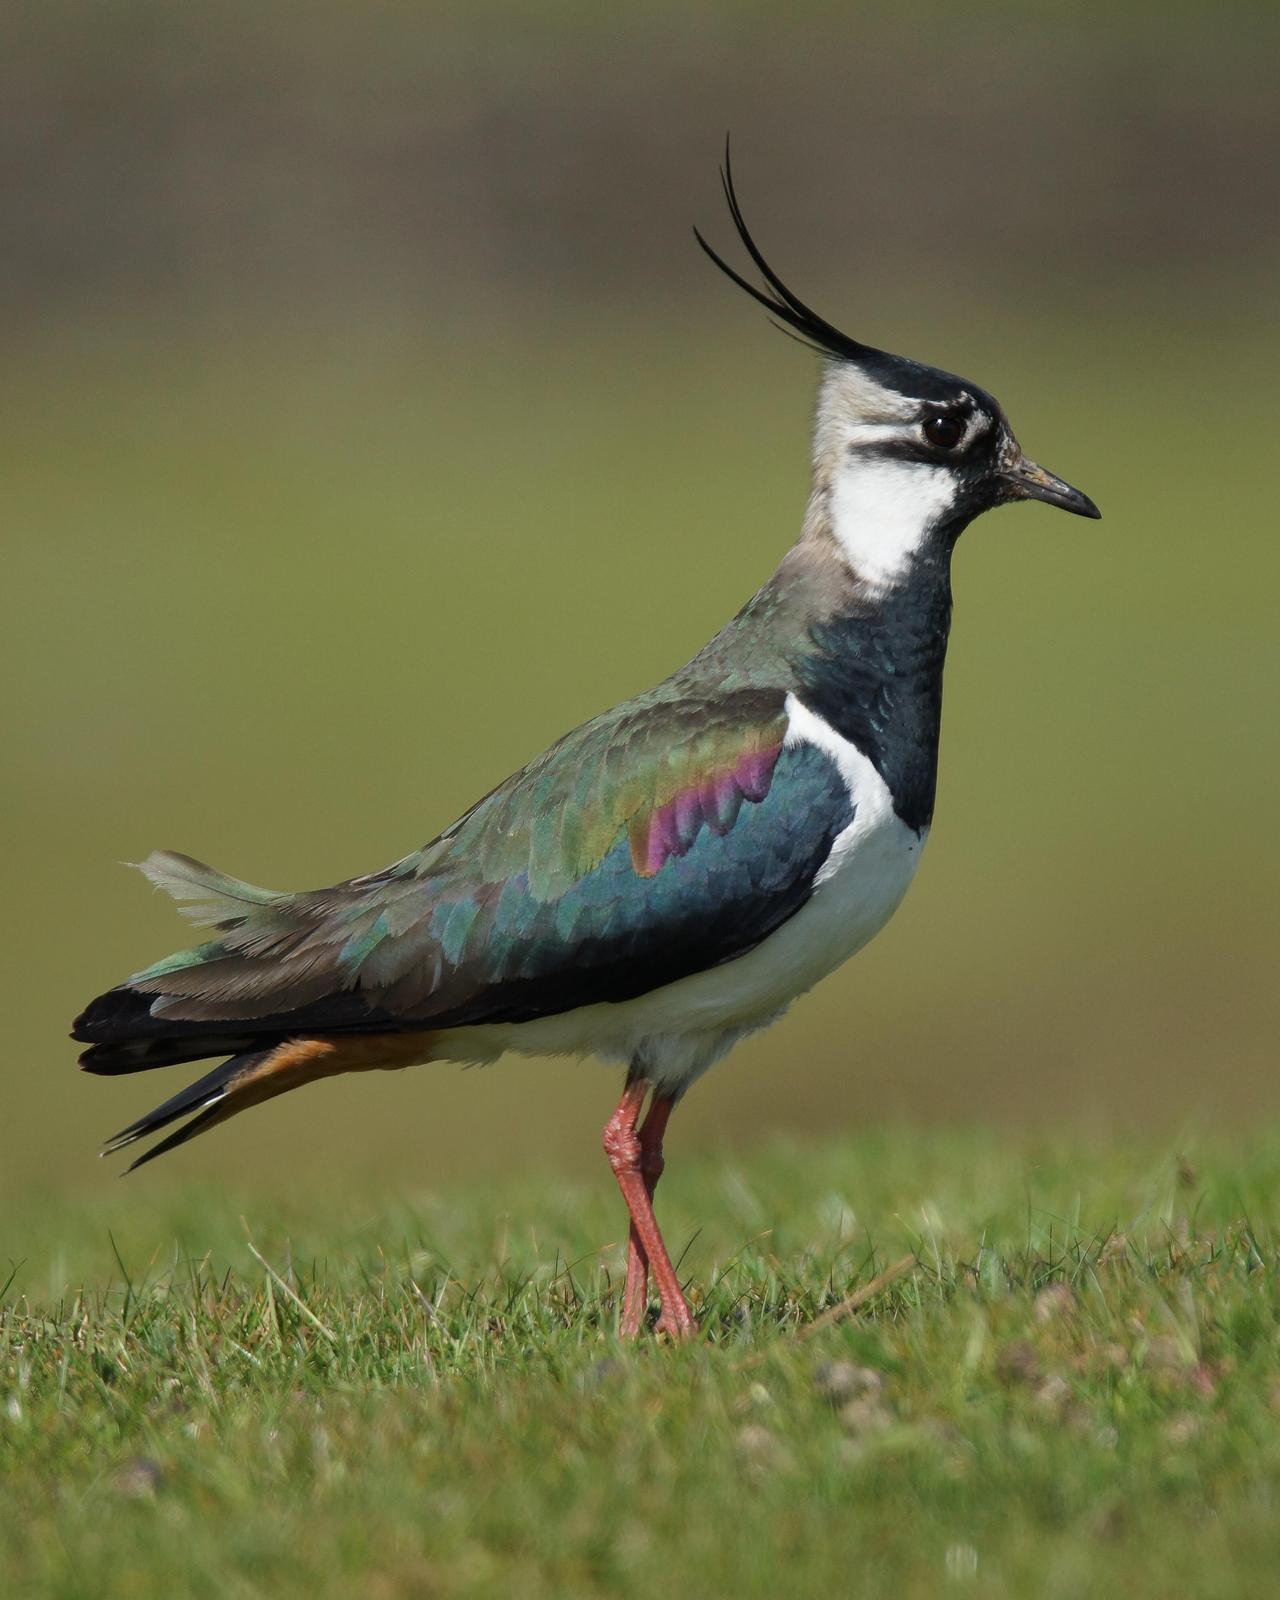 Northern Lapwing Photo by Steve Percival